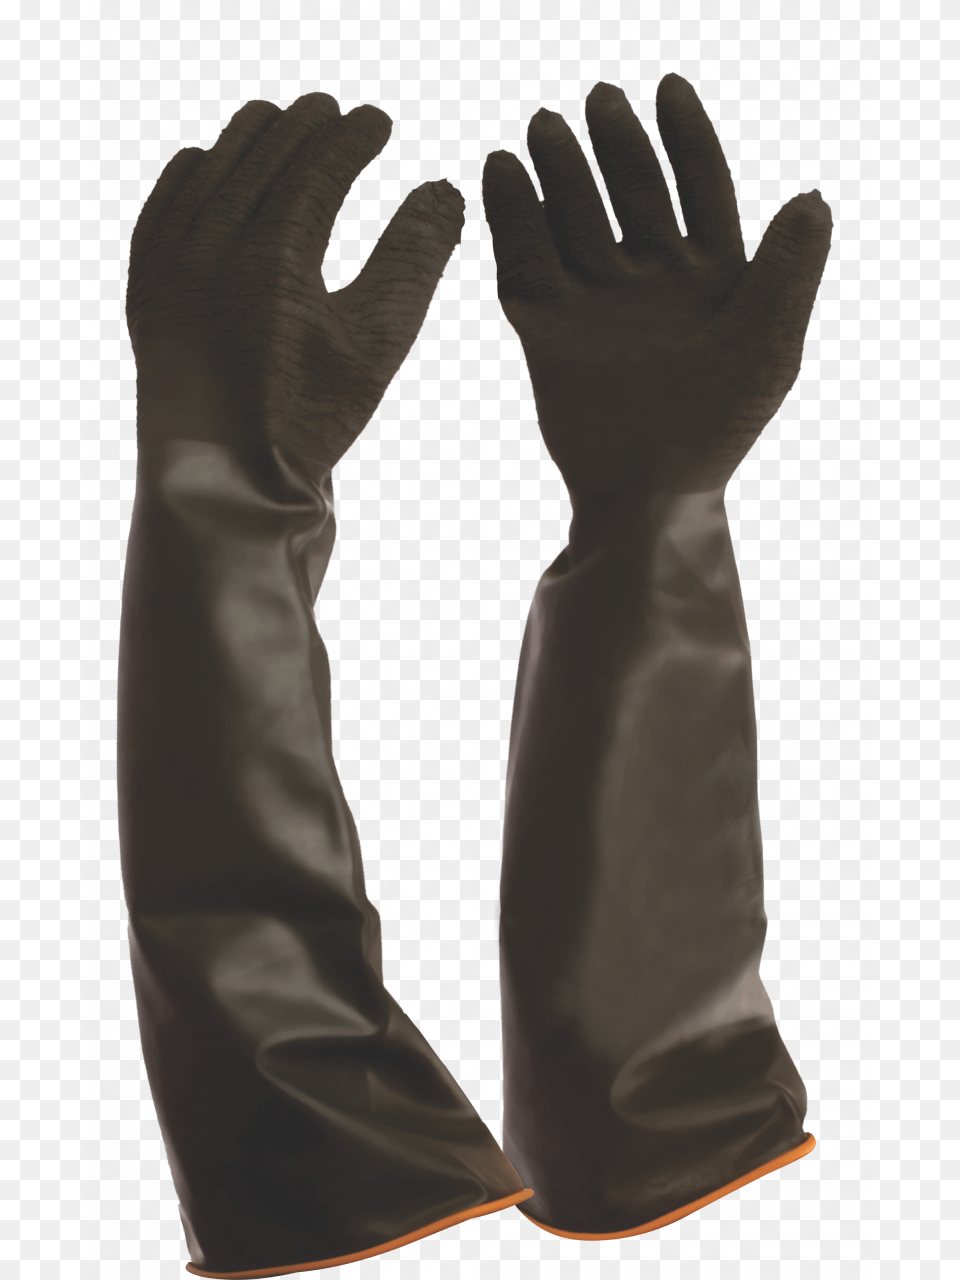 Rough Palm Rubber Glove Leather, Clothing, Adult, Male, Man Free Png Download